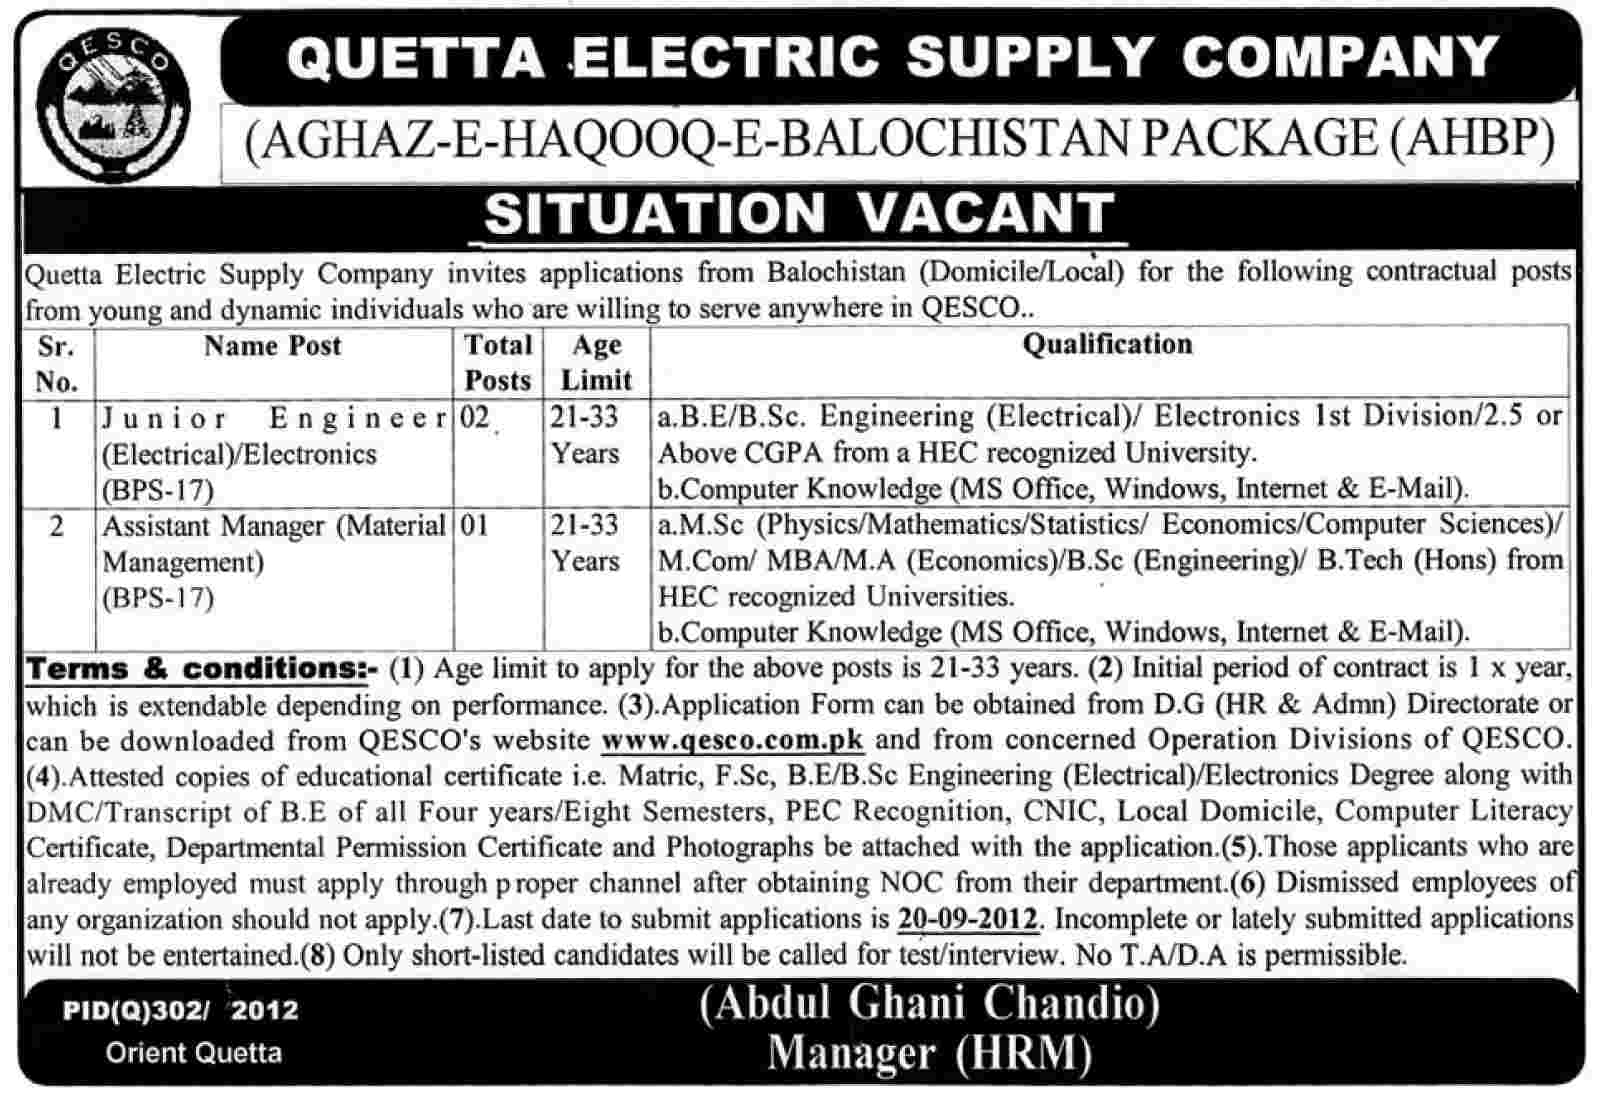 QESCO Quetta Electric Supply Company Requires Junior Engineer and Assistant Manager (Government Job)